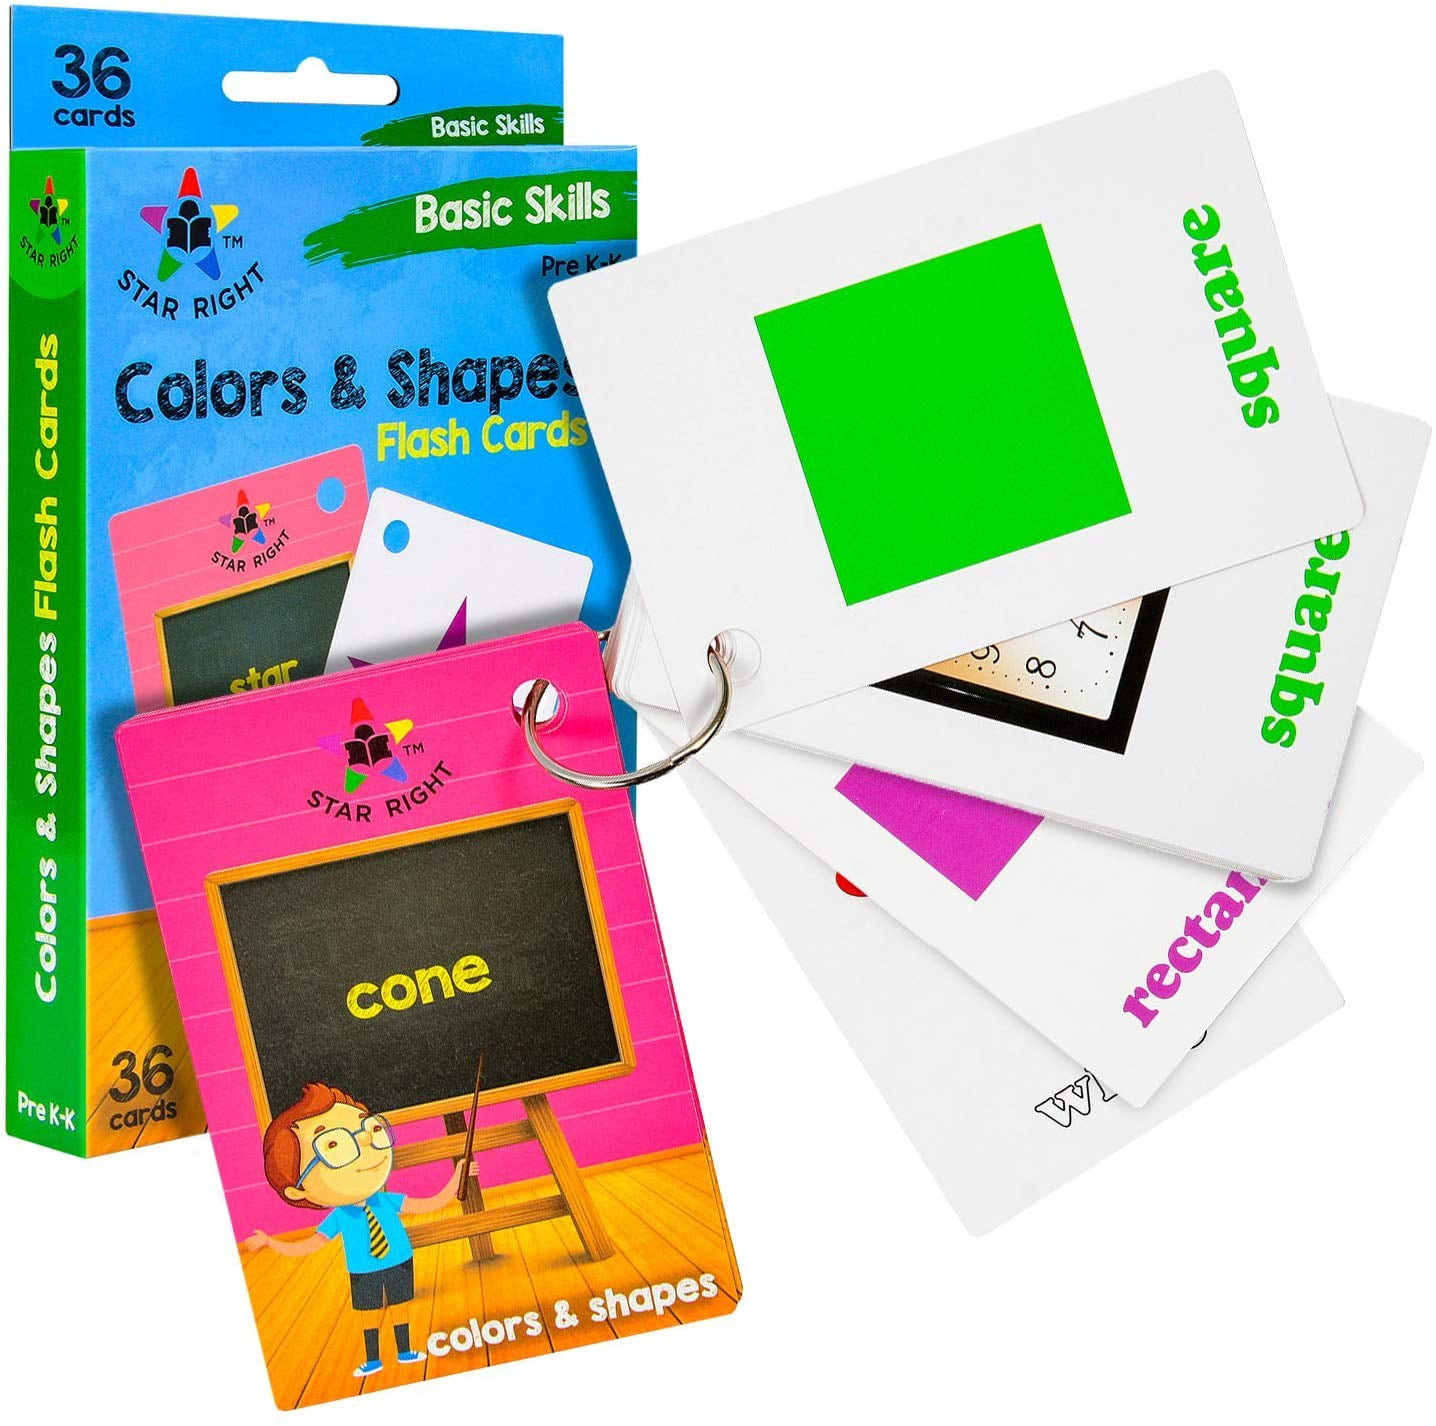 3 Pack/36 cards per Pack Phonics and Money Flash Cards Flash Cards Spelling